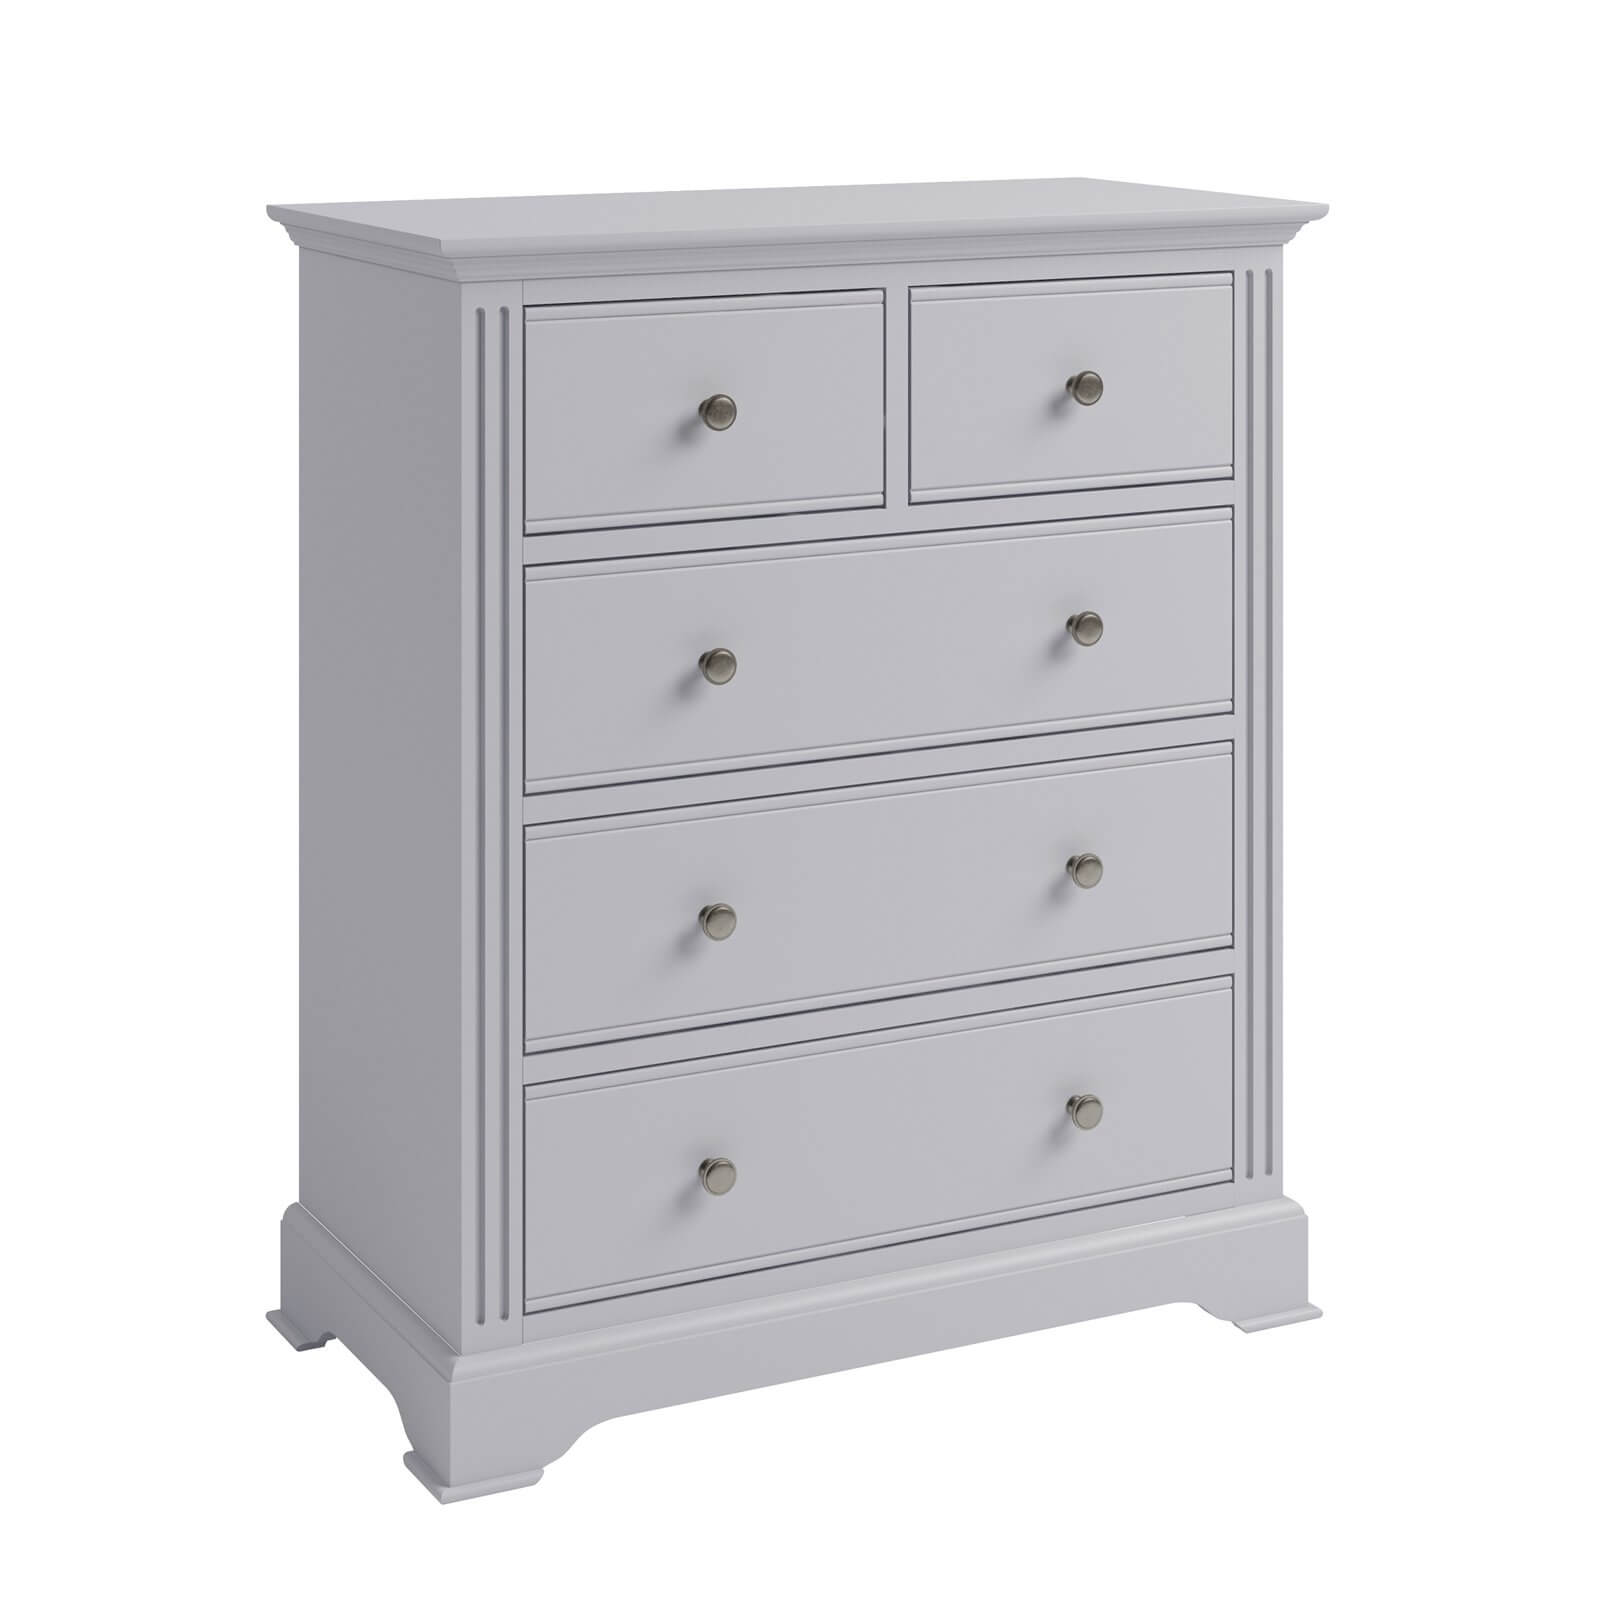 Camborne 2 Over 3 Chest of Drawers - Grey